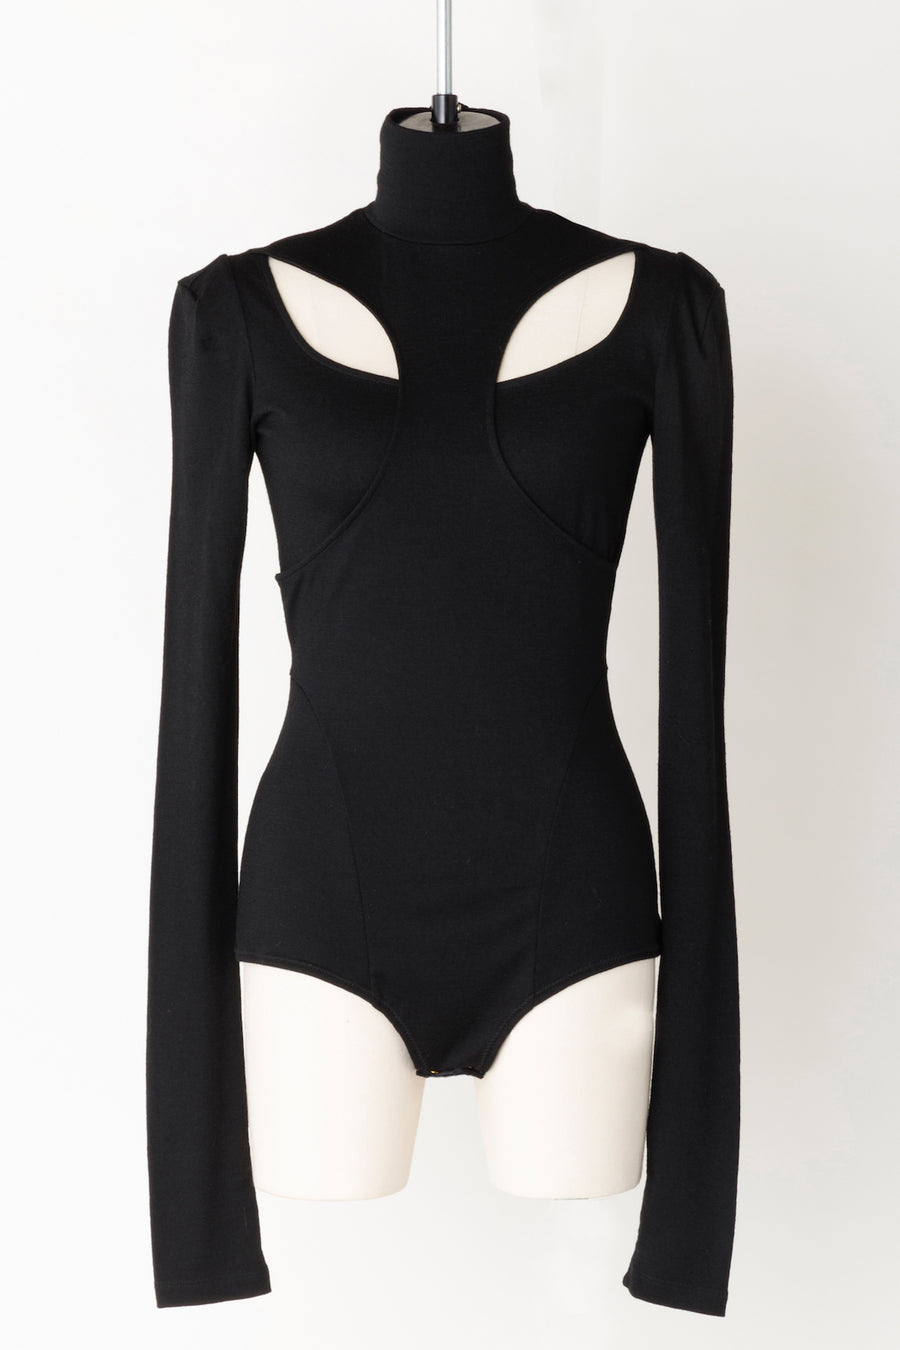 Fetico's Wool Layered Body Suits Mail Order | Palette Art Alive ...